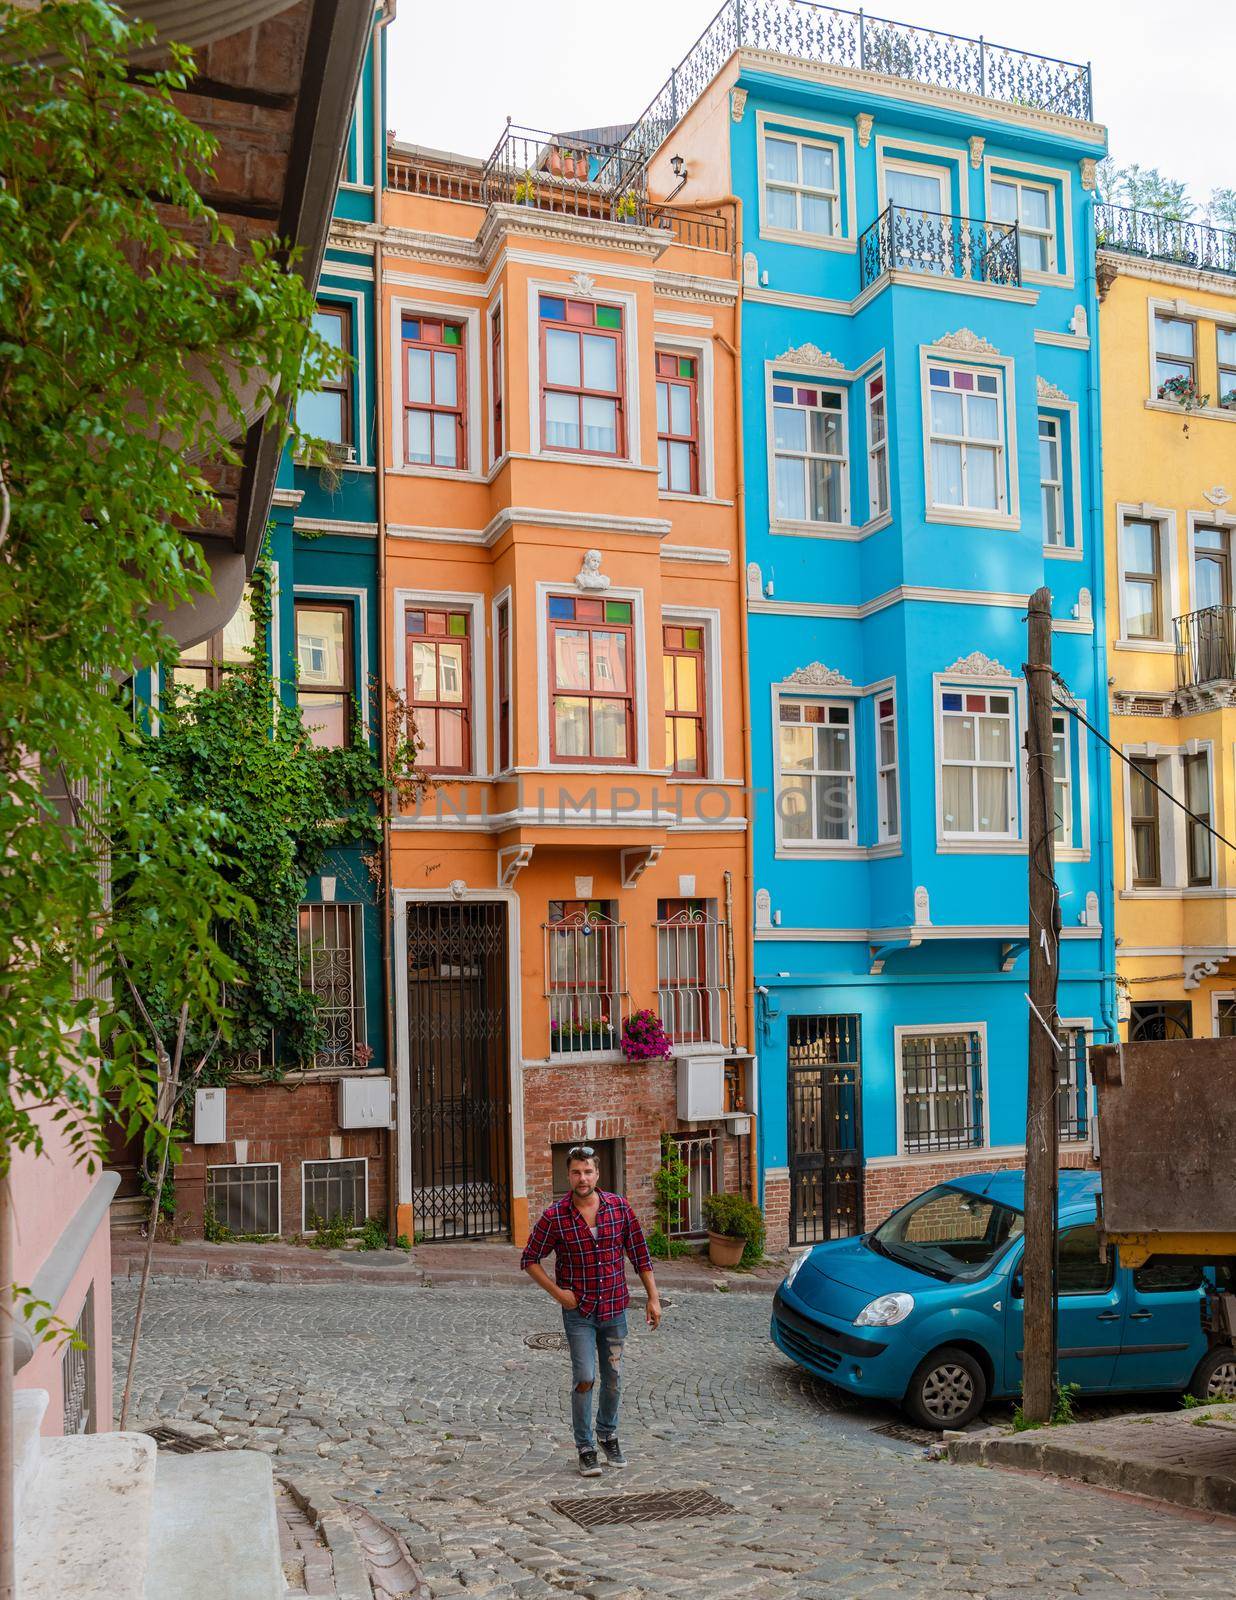 Young men tourists in Balat district Istanbul Turkey, colorful homes and houses in the town of Balat with tourists enjoying a beautiful summer day.